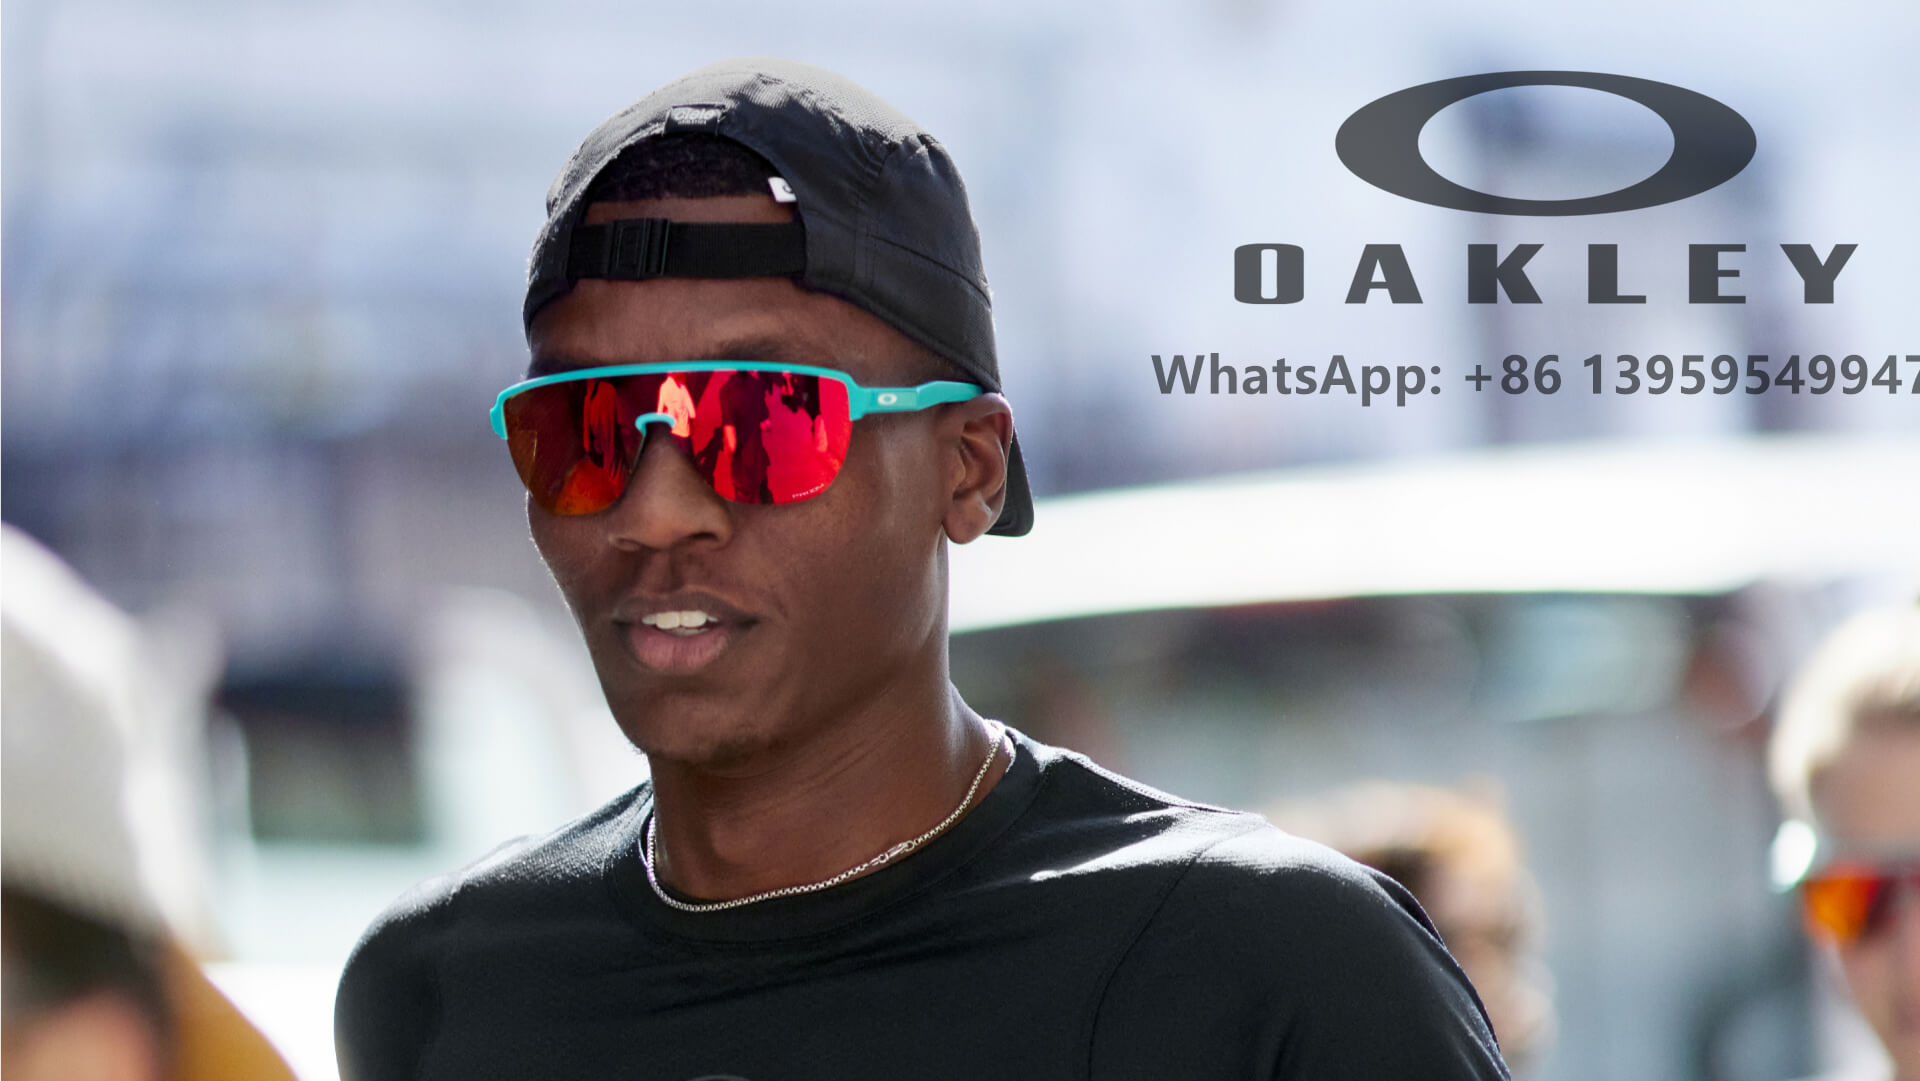 Clearance Oakley Sunglasses Let You Wander In The World Of Running